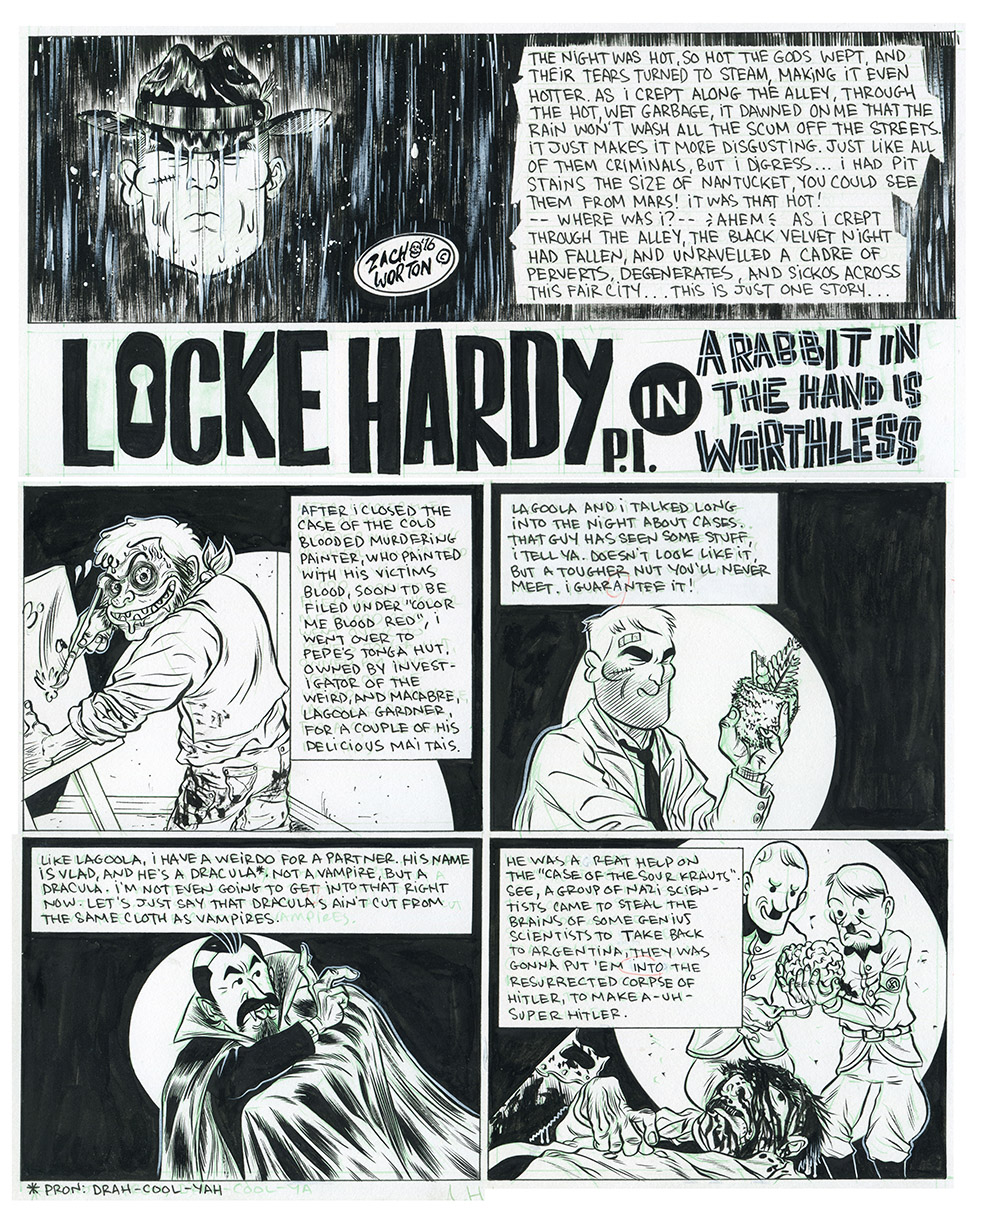 Locke Hardy, P.I.: A Rabbit in the Hand is Worthless - page 1